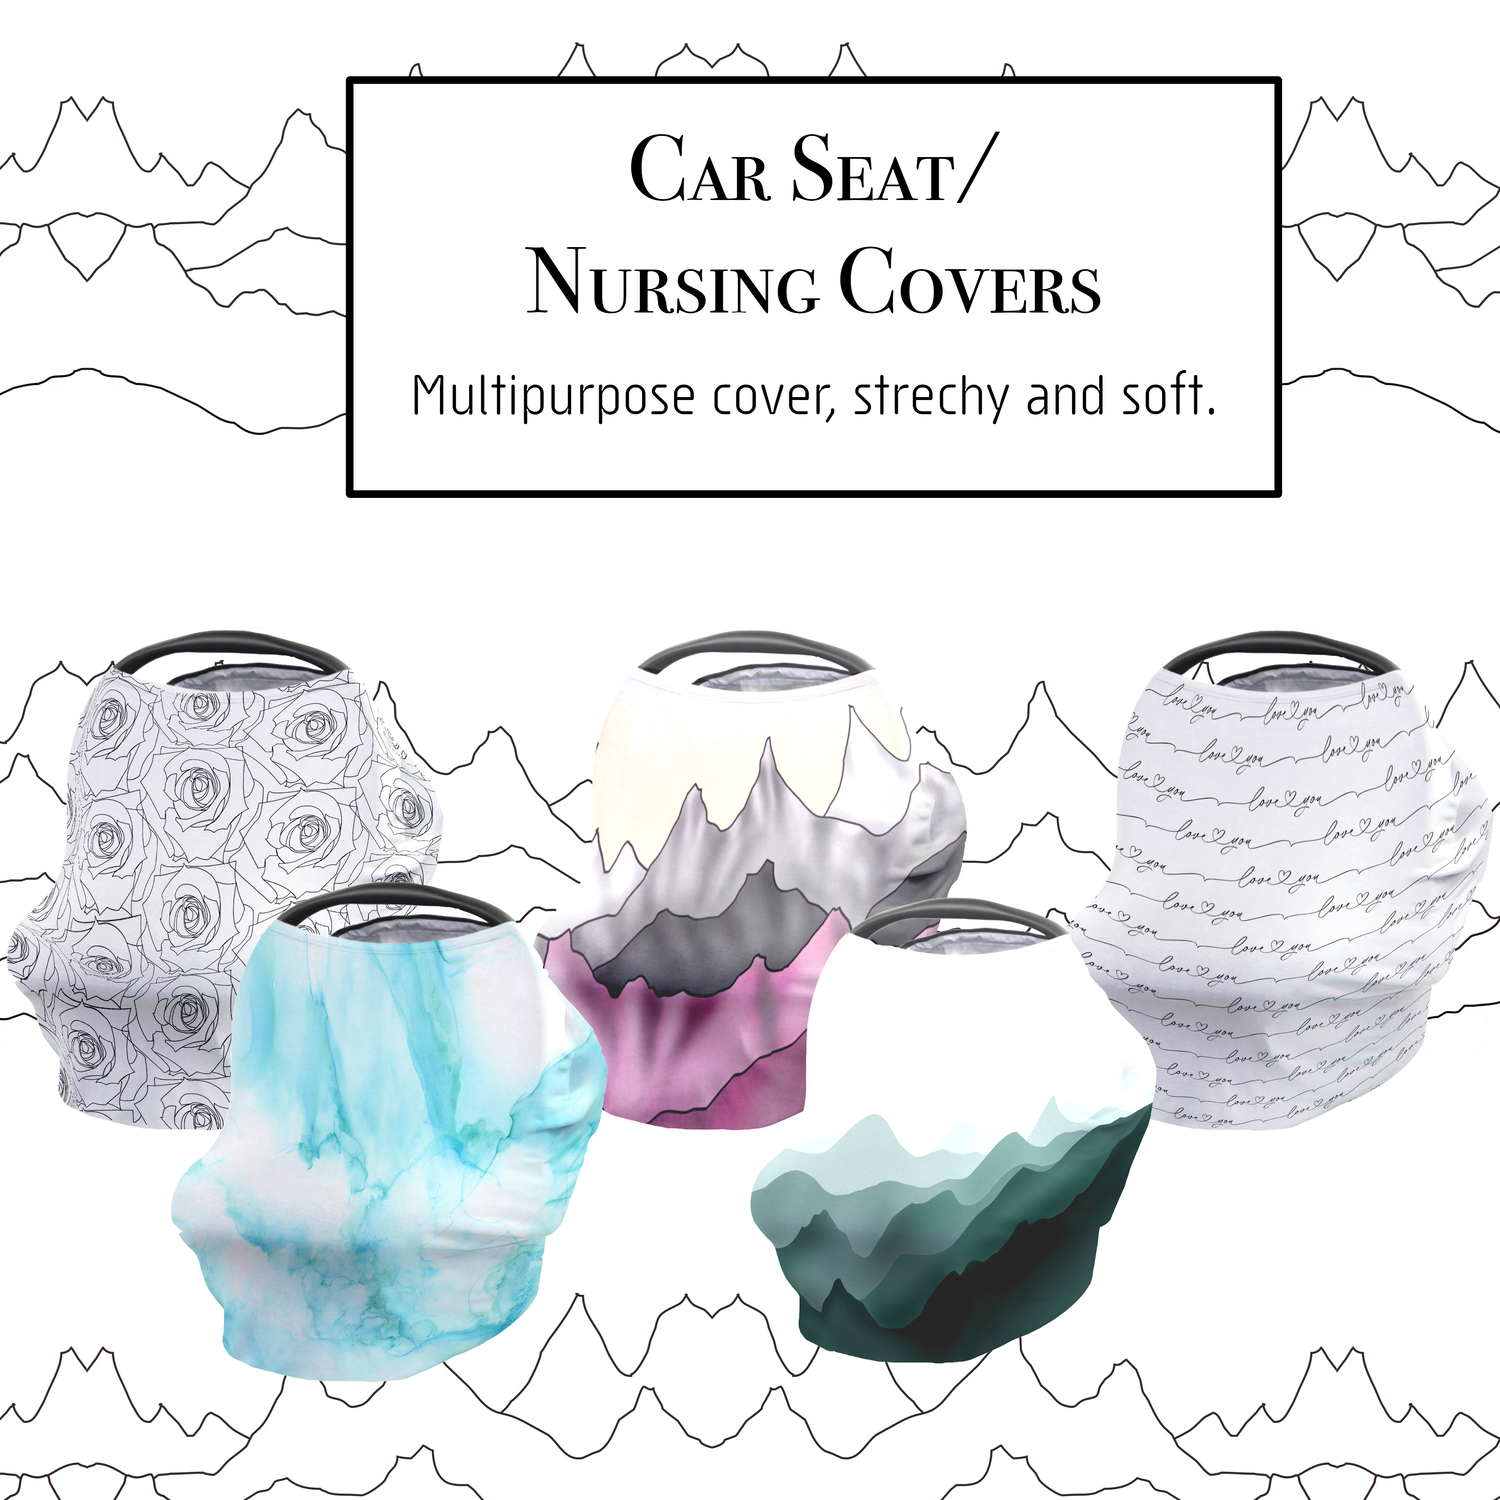 Nursing and Carseat Covers